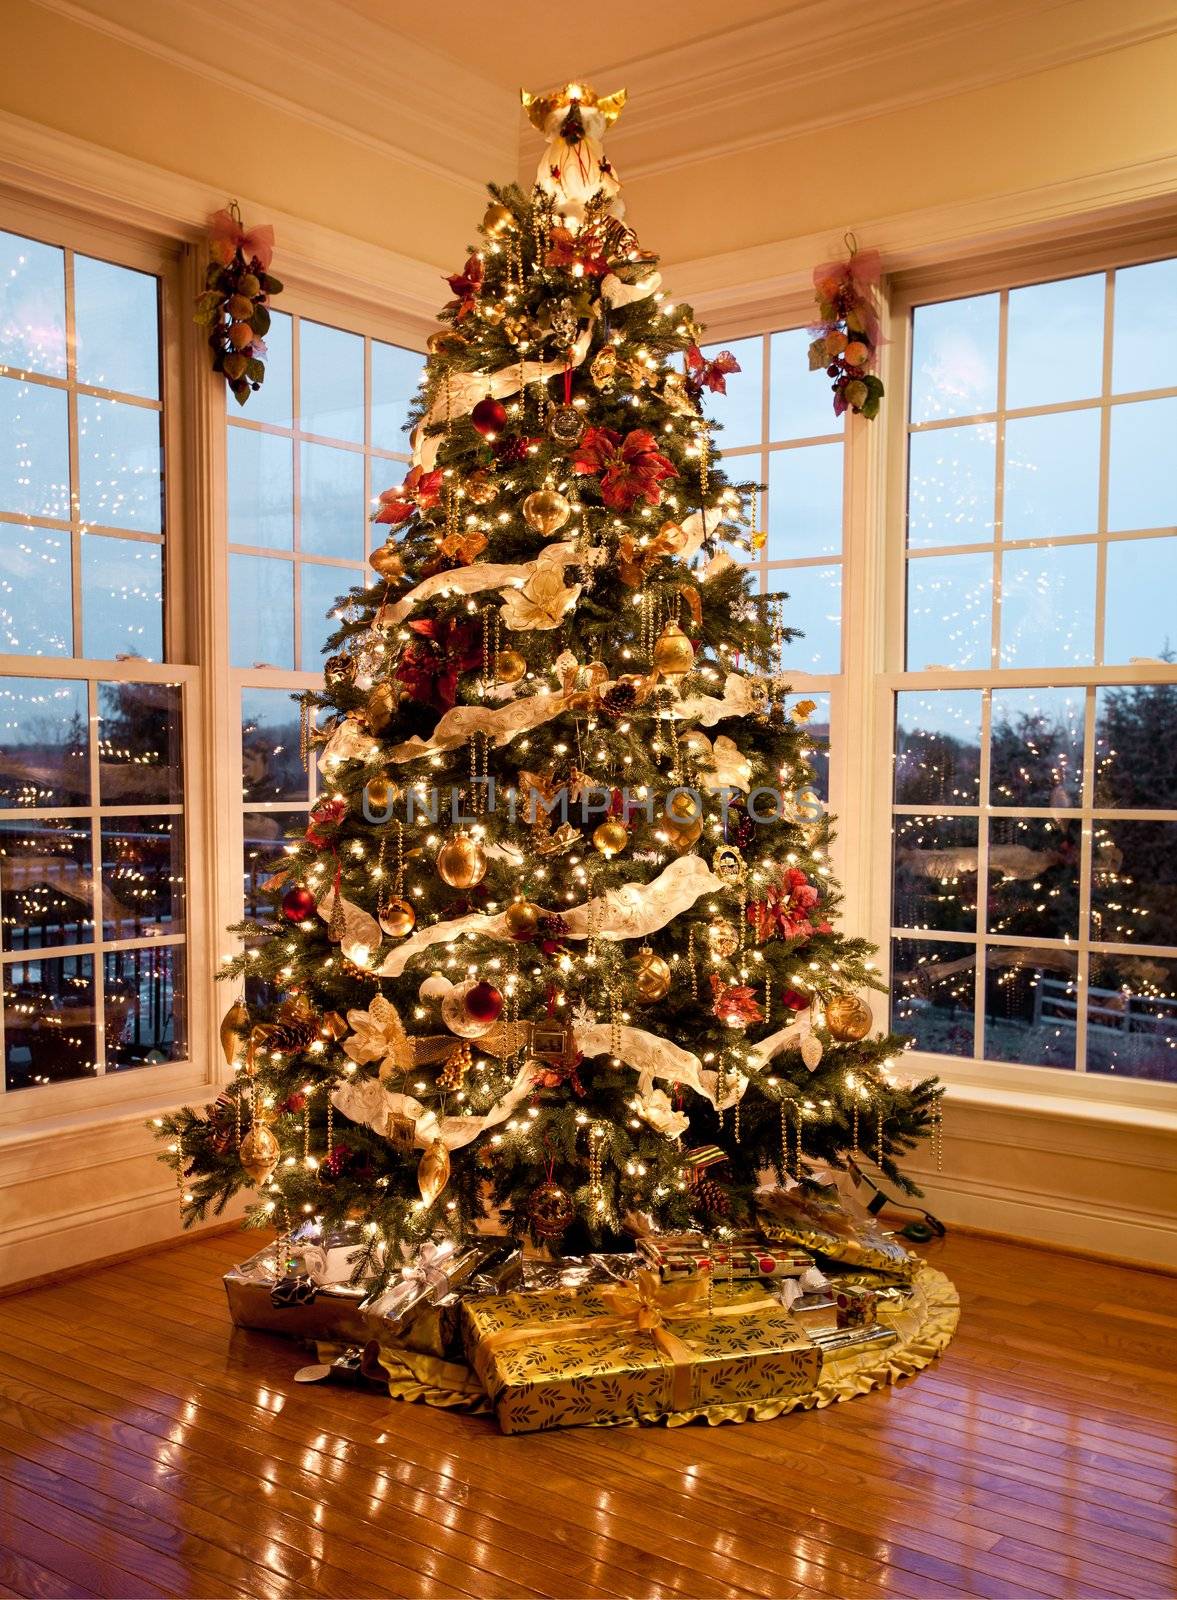 Christmas tree with presents and lights reflecting in windows around the tree in modern home